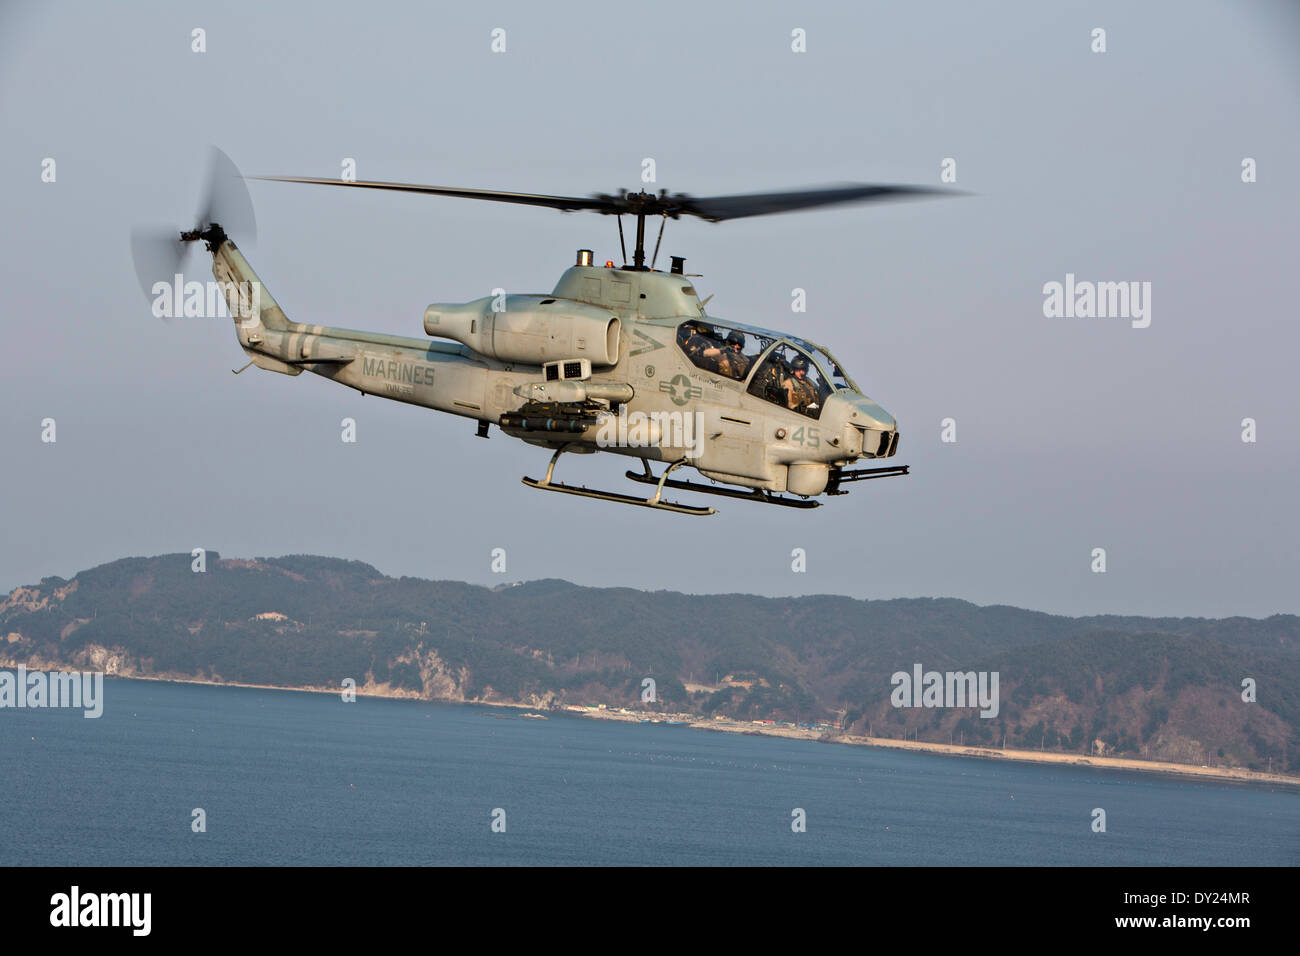 A US Marine Corps AH-1W Cobra helicopter provides close air support during exercise Ssang Yong April 1, 2014 off the coast of Doksu-Ri, Pohang, South Korea. Stock Photo